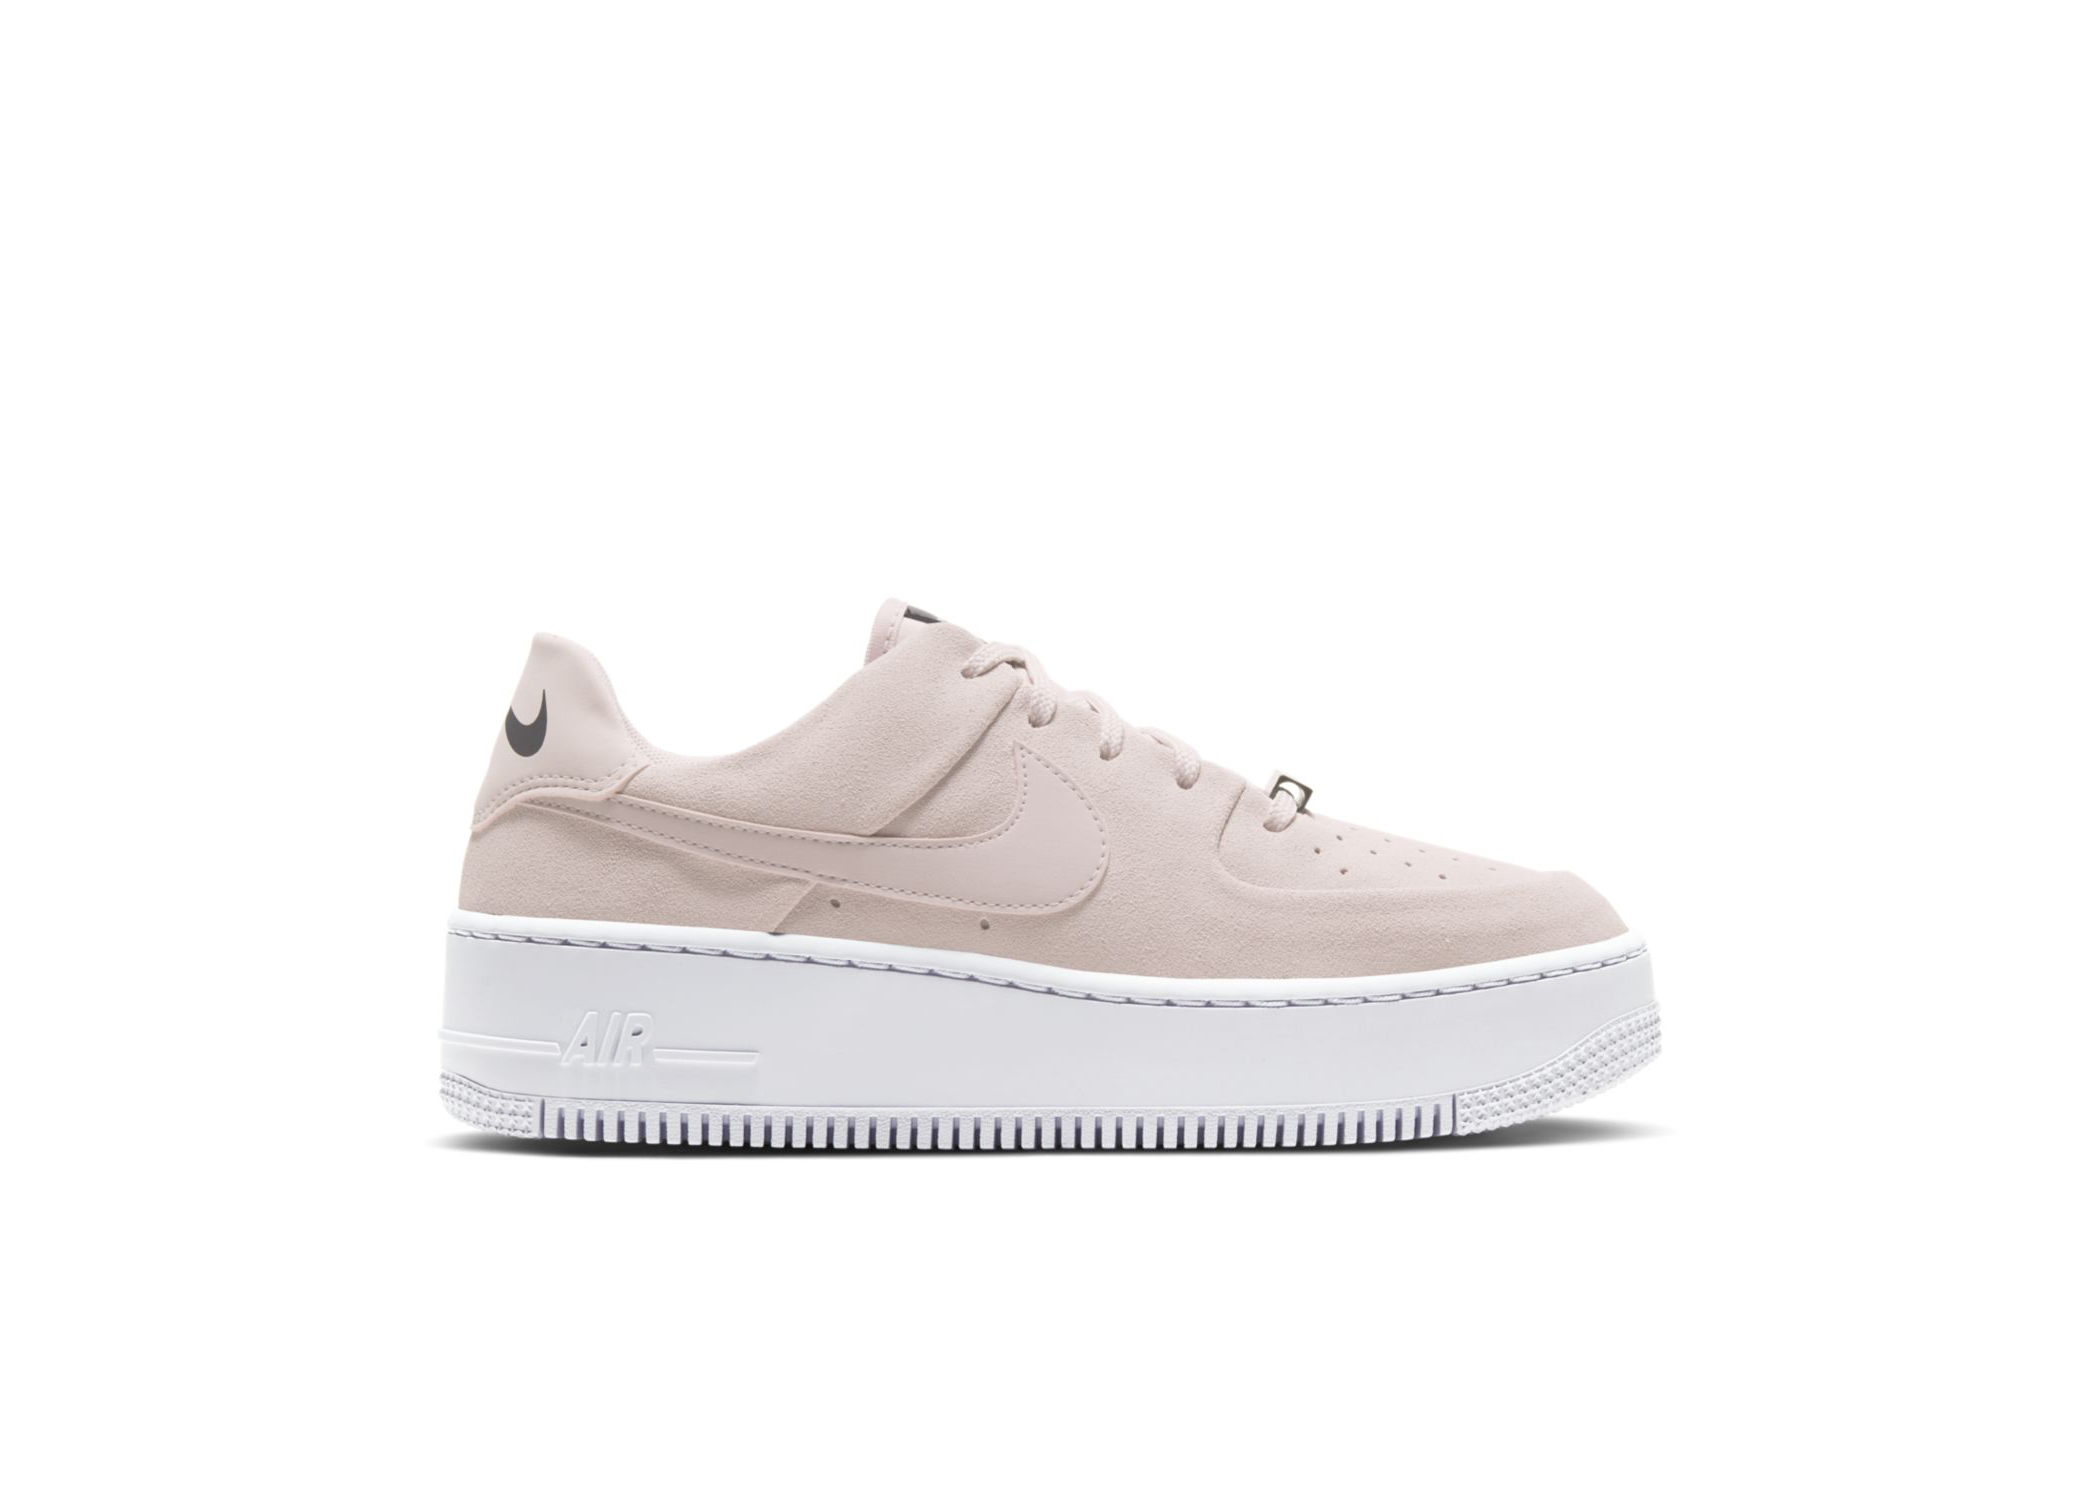 Nike Air Force 1 Sage Low Barely Rose (Women's) - AR5339-604 - US